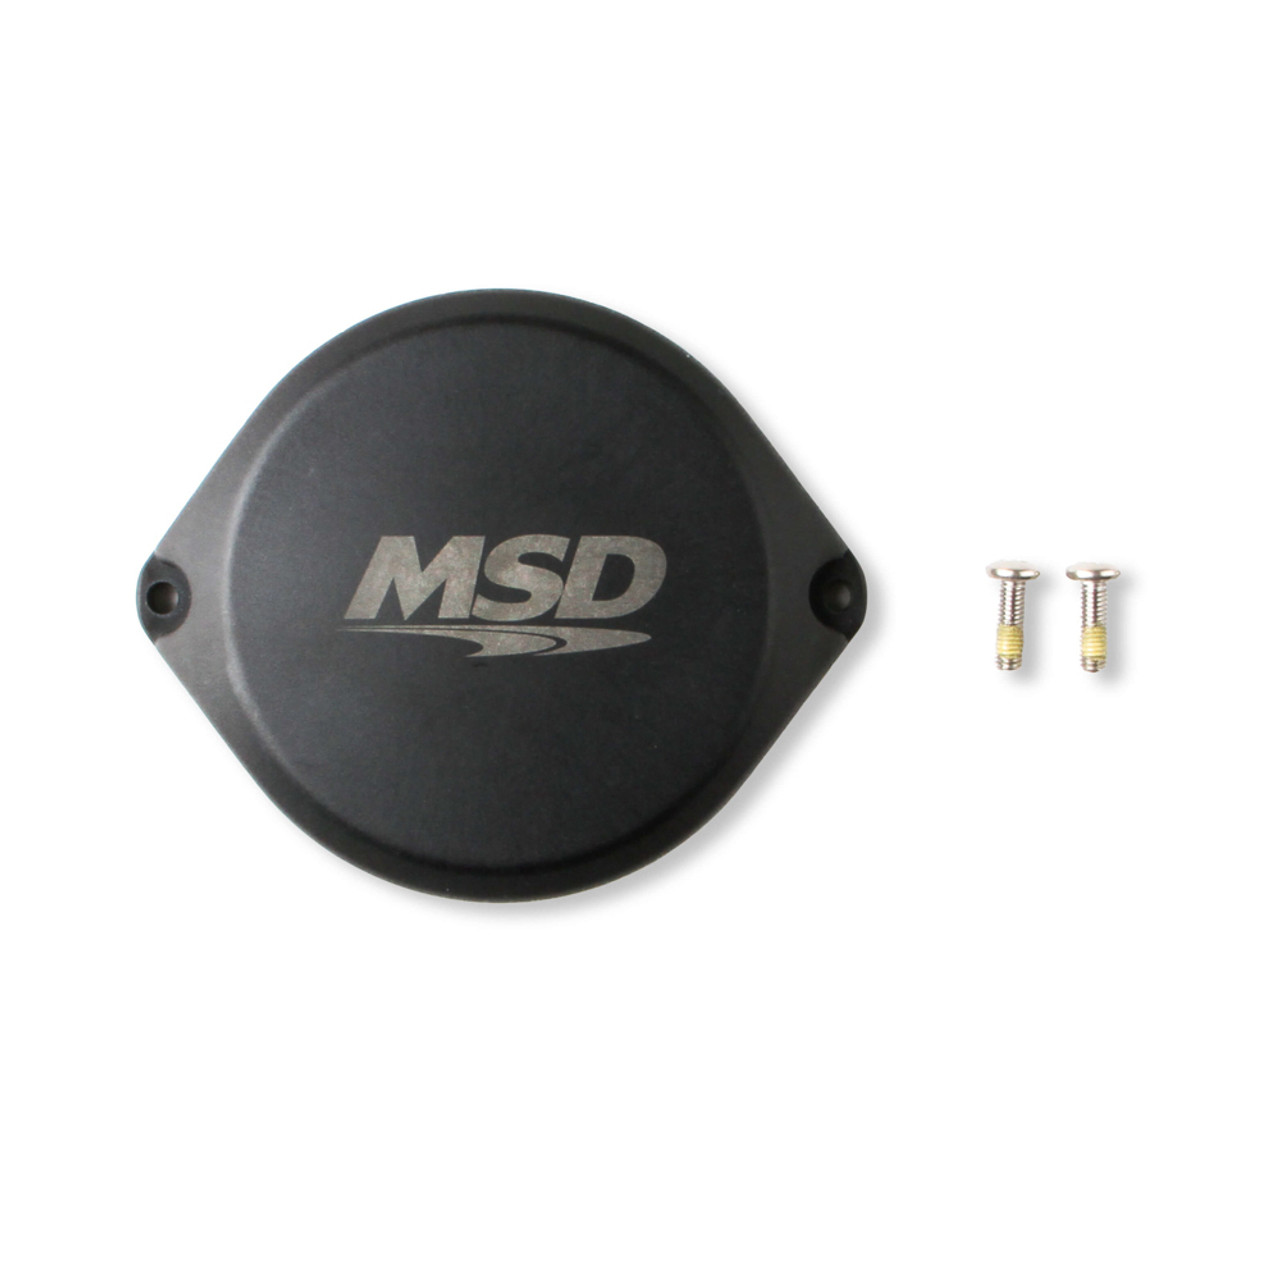 MSD Ignition COP Blank Cap for Dual Sync Distributors Black